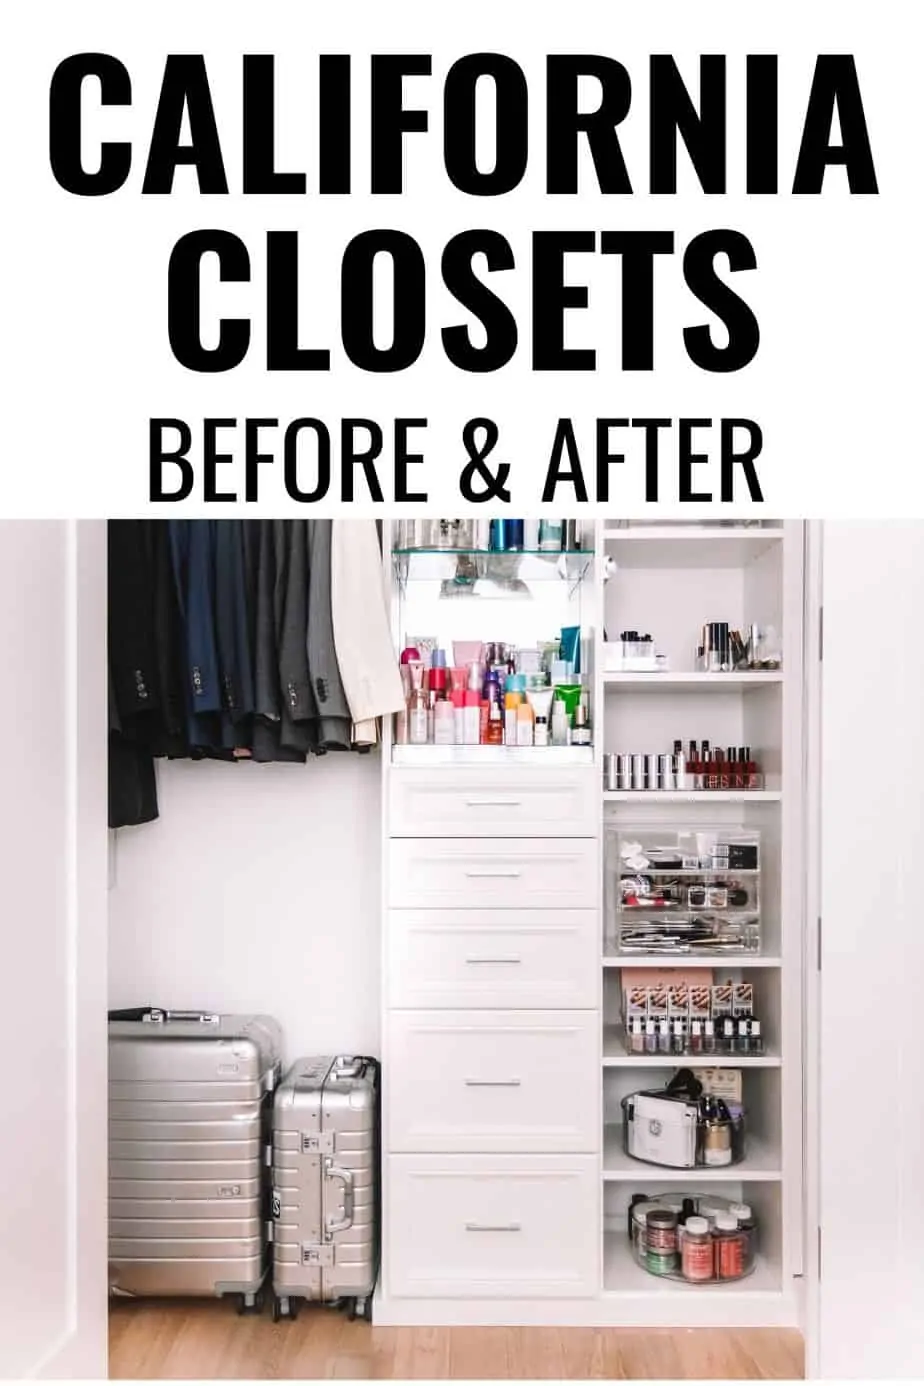 How Much Do California Closets Cost? Custom Closet Pricing & Review